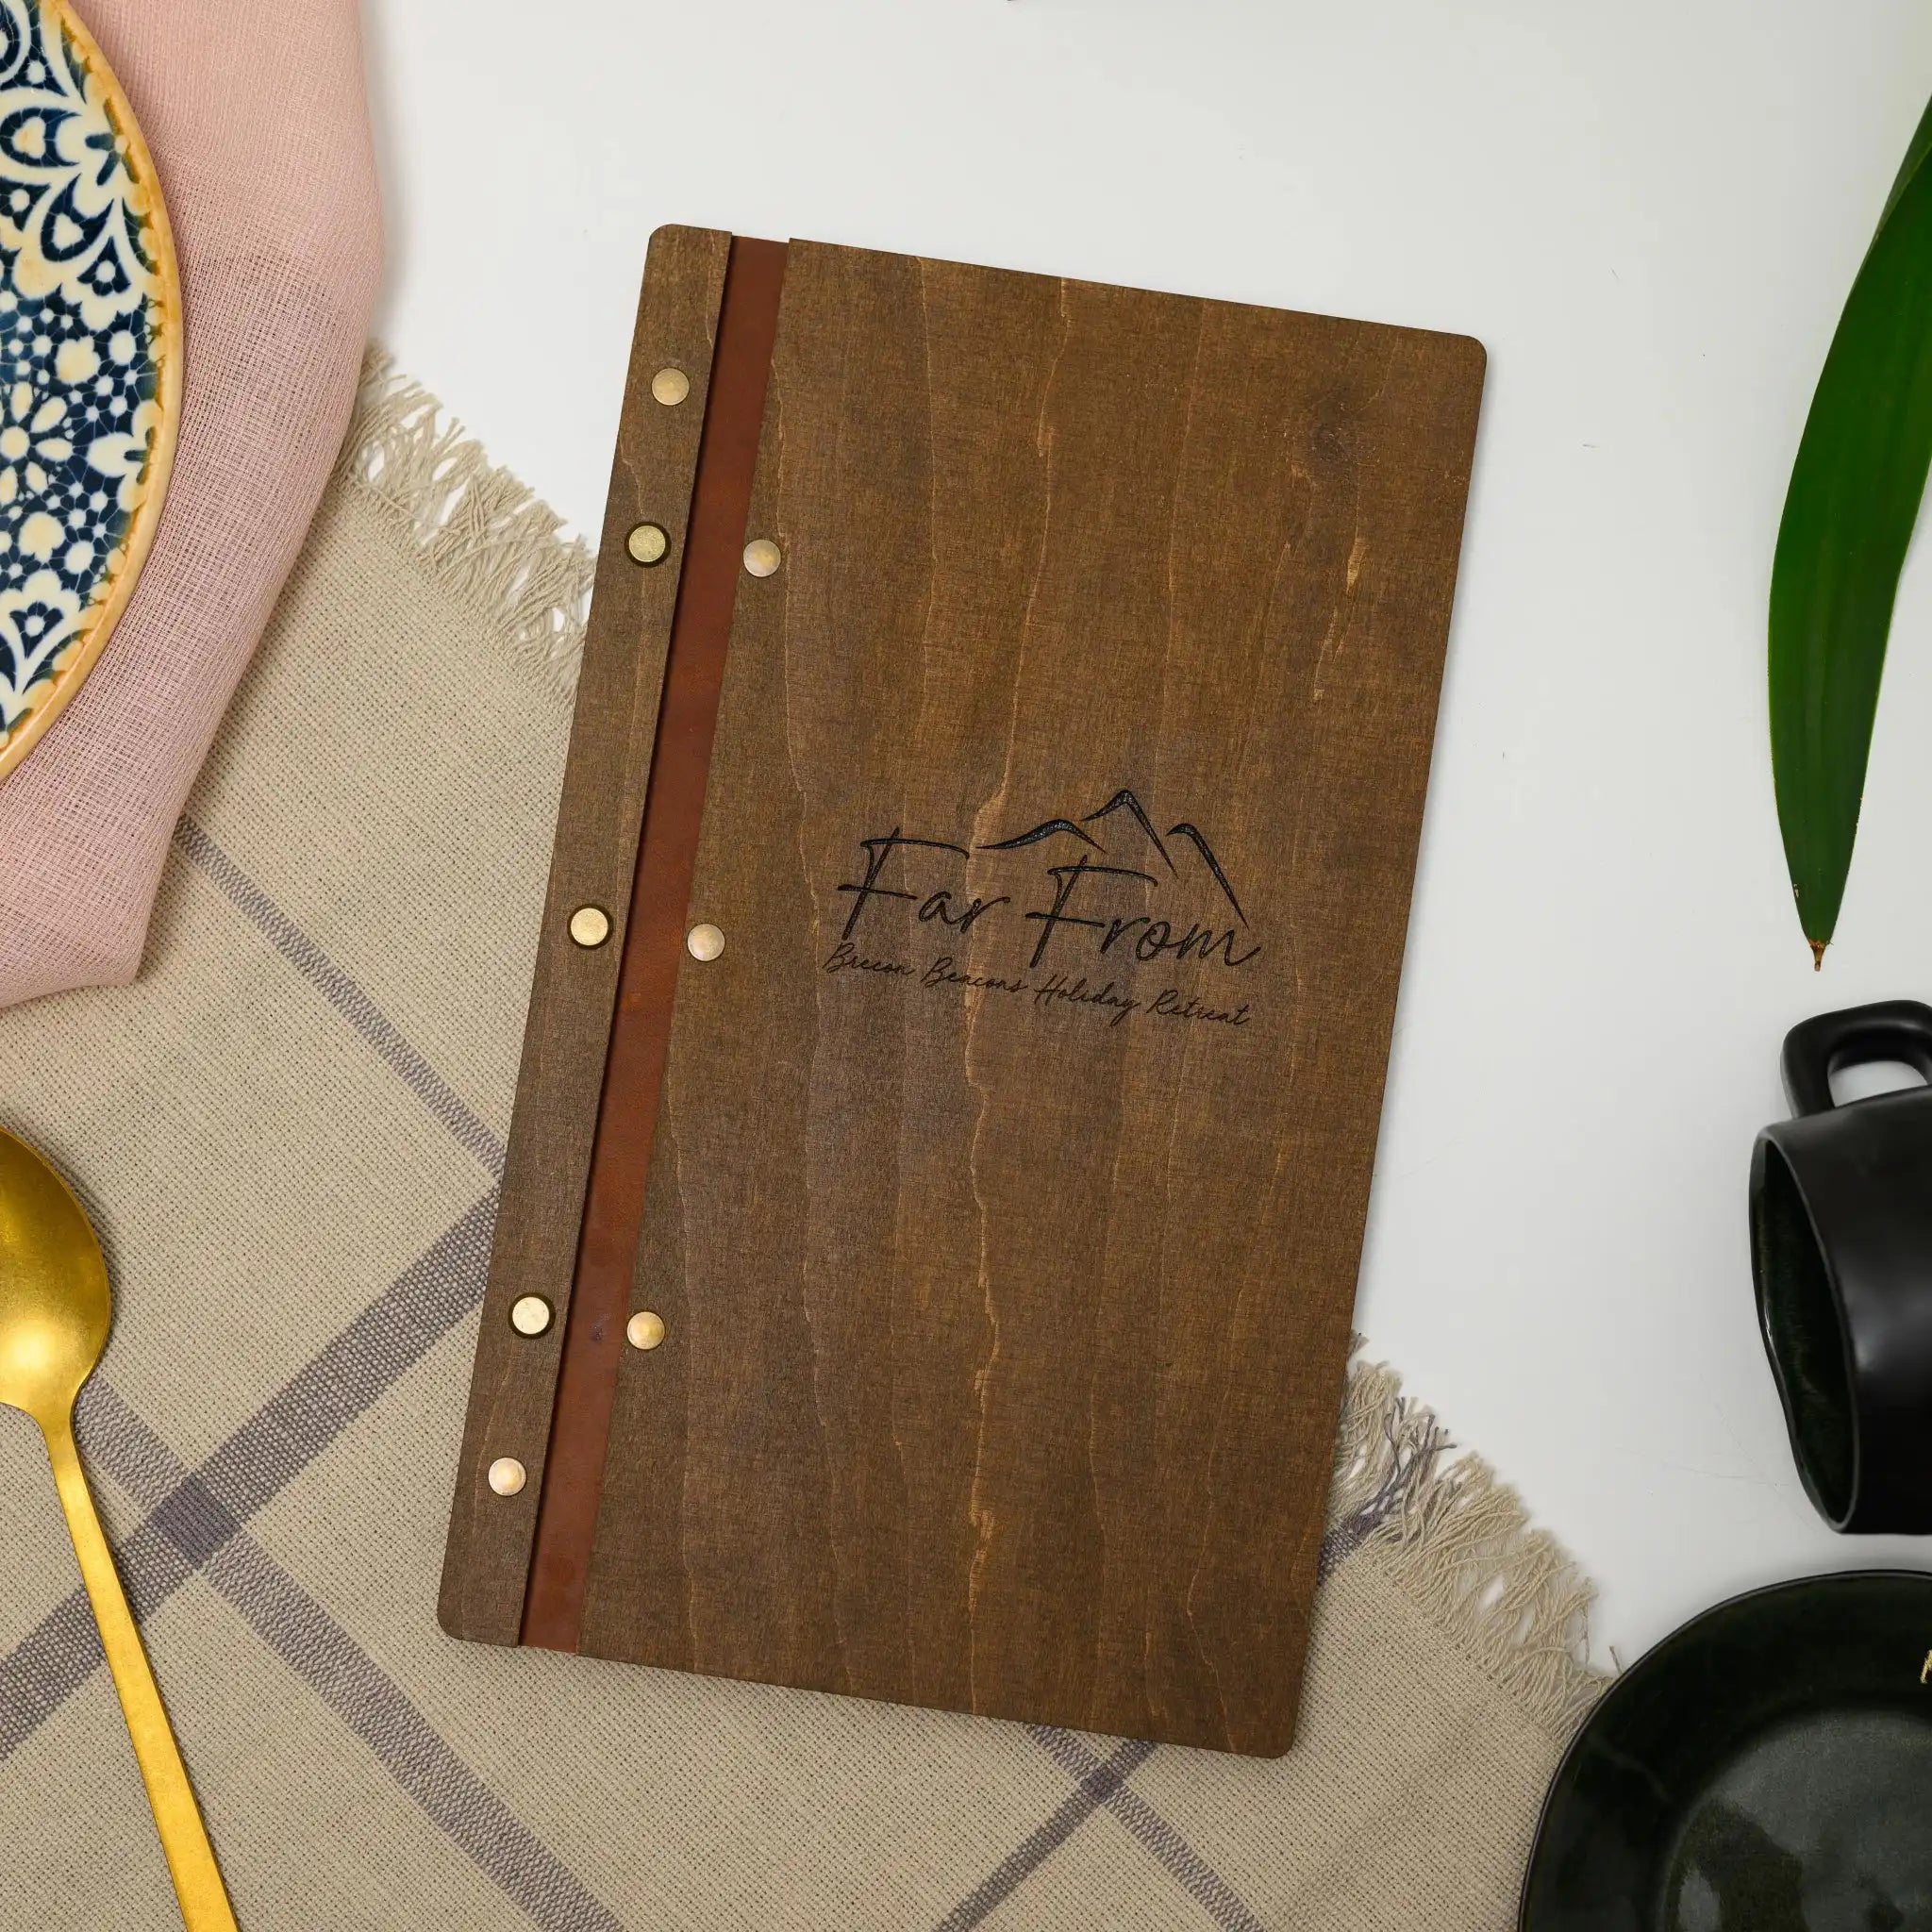 Whiskey List Folder: Perfect for highlighting your whiskey offerings in style.